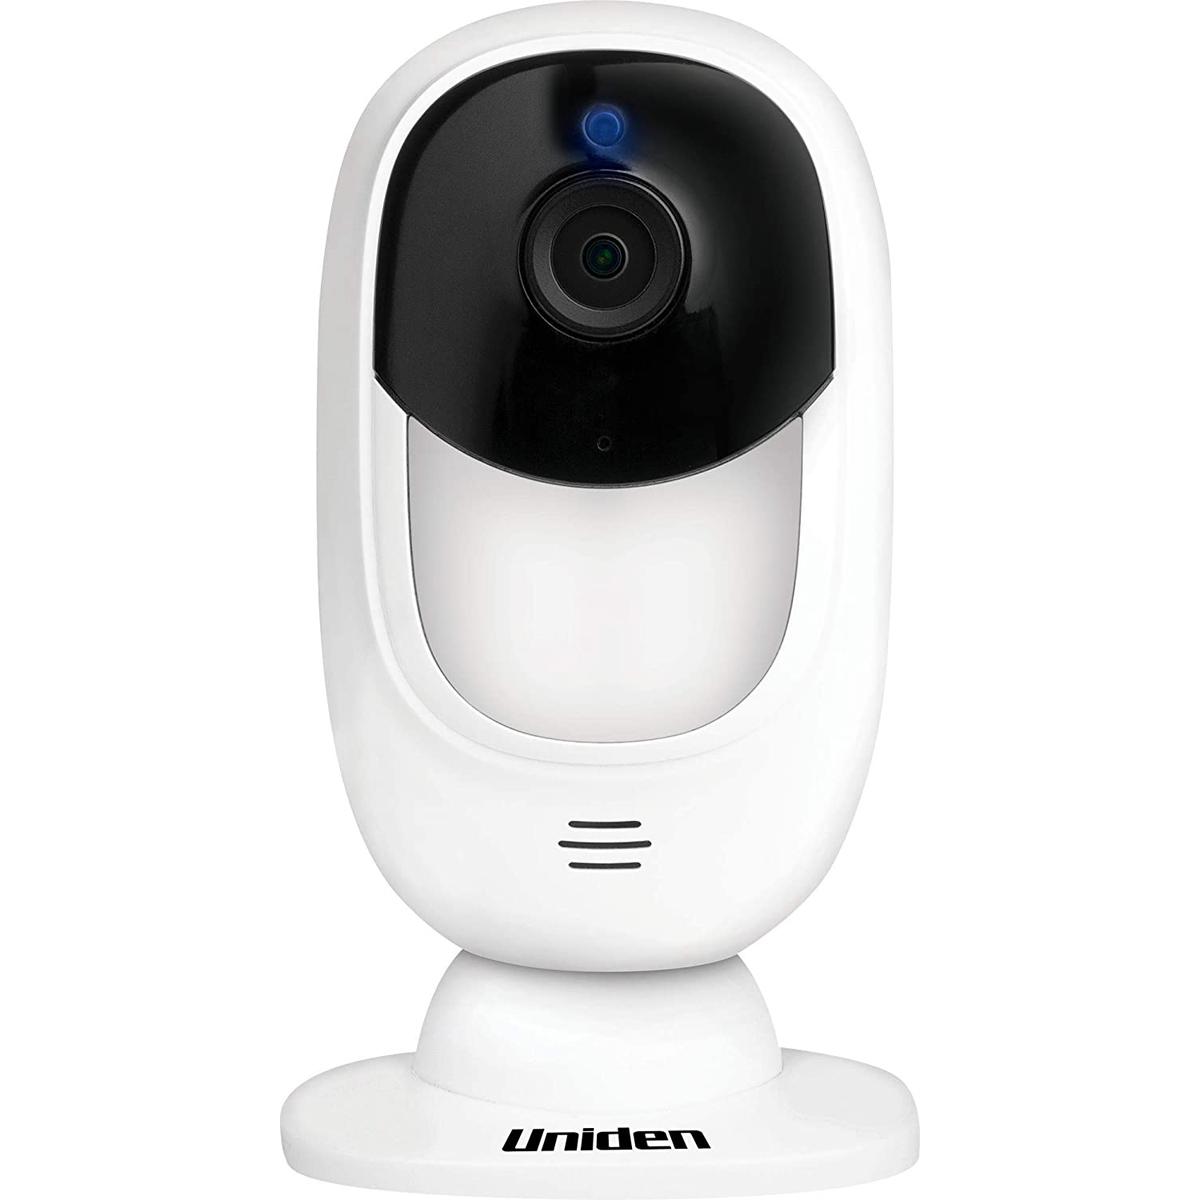 Uniden Solo Color 1080p Battery Powered Security Camera for $39.99 Shipped